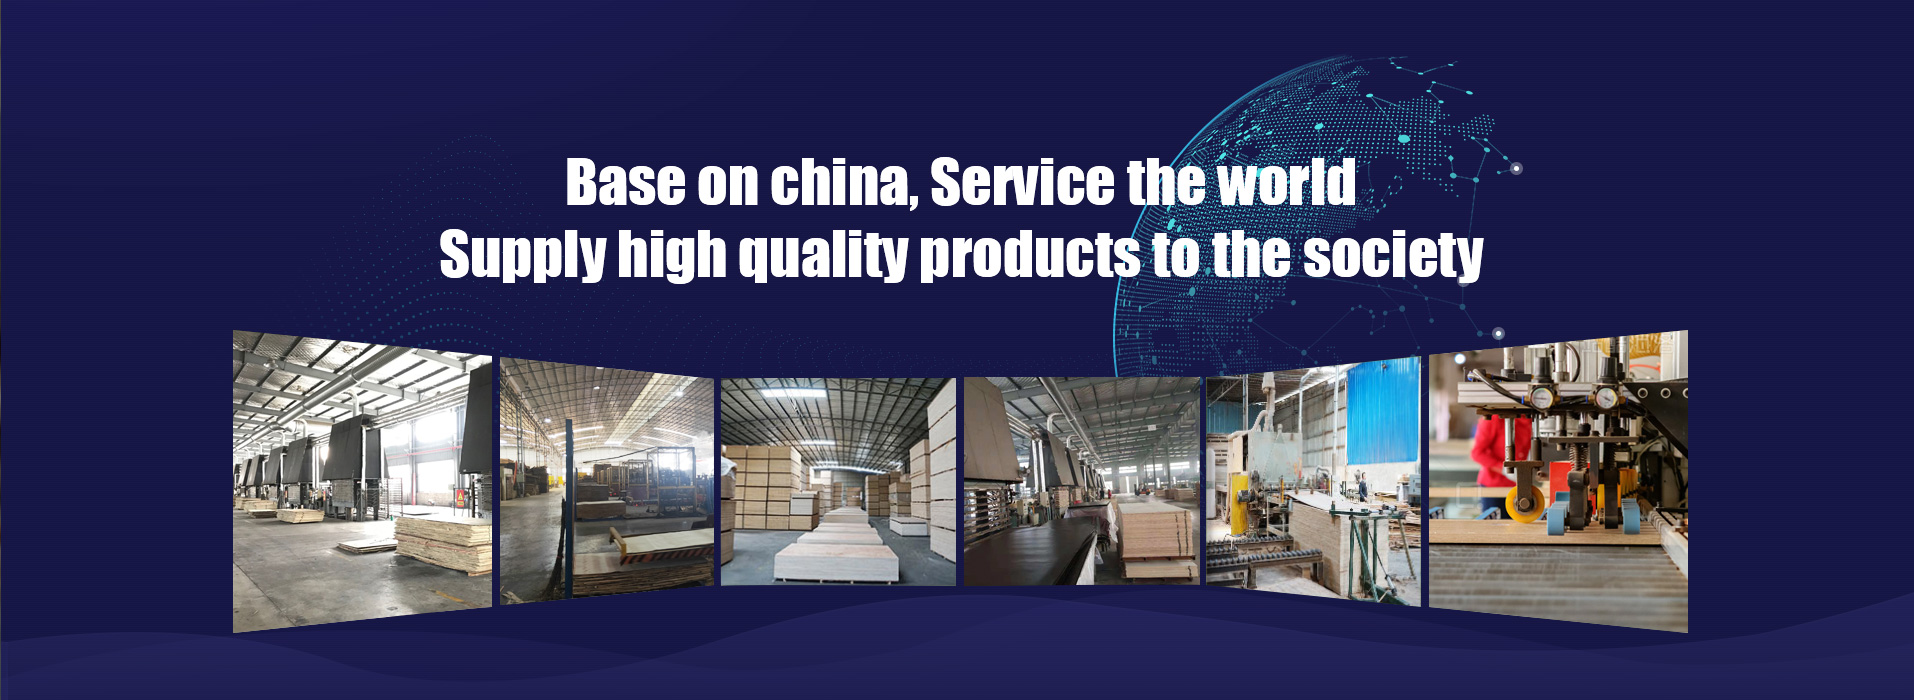 Base on china, Service the world Supply high quality products to the society